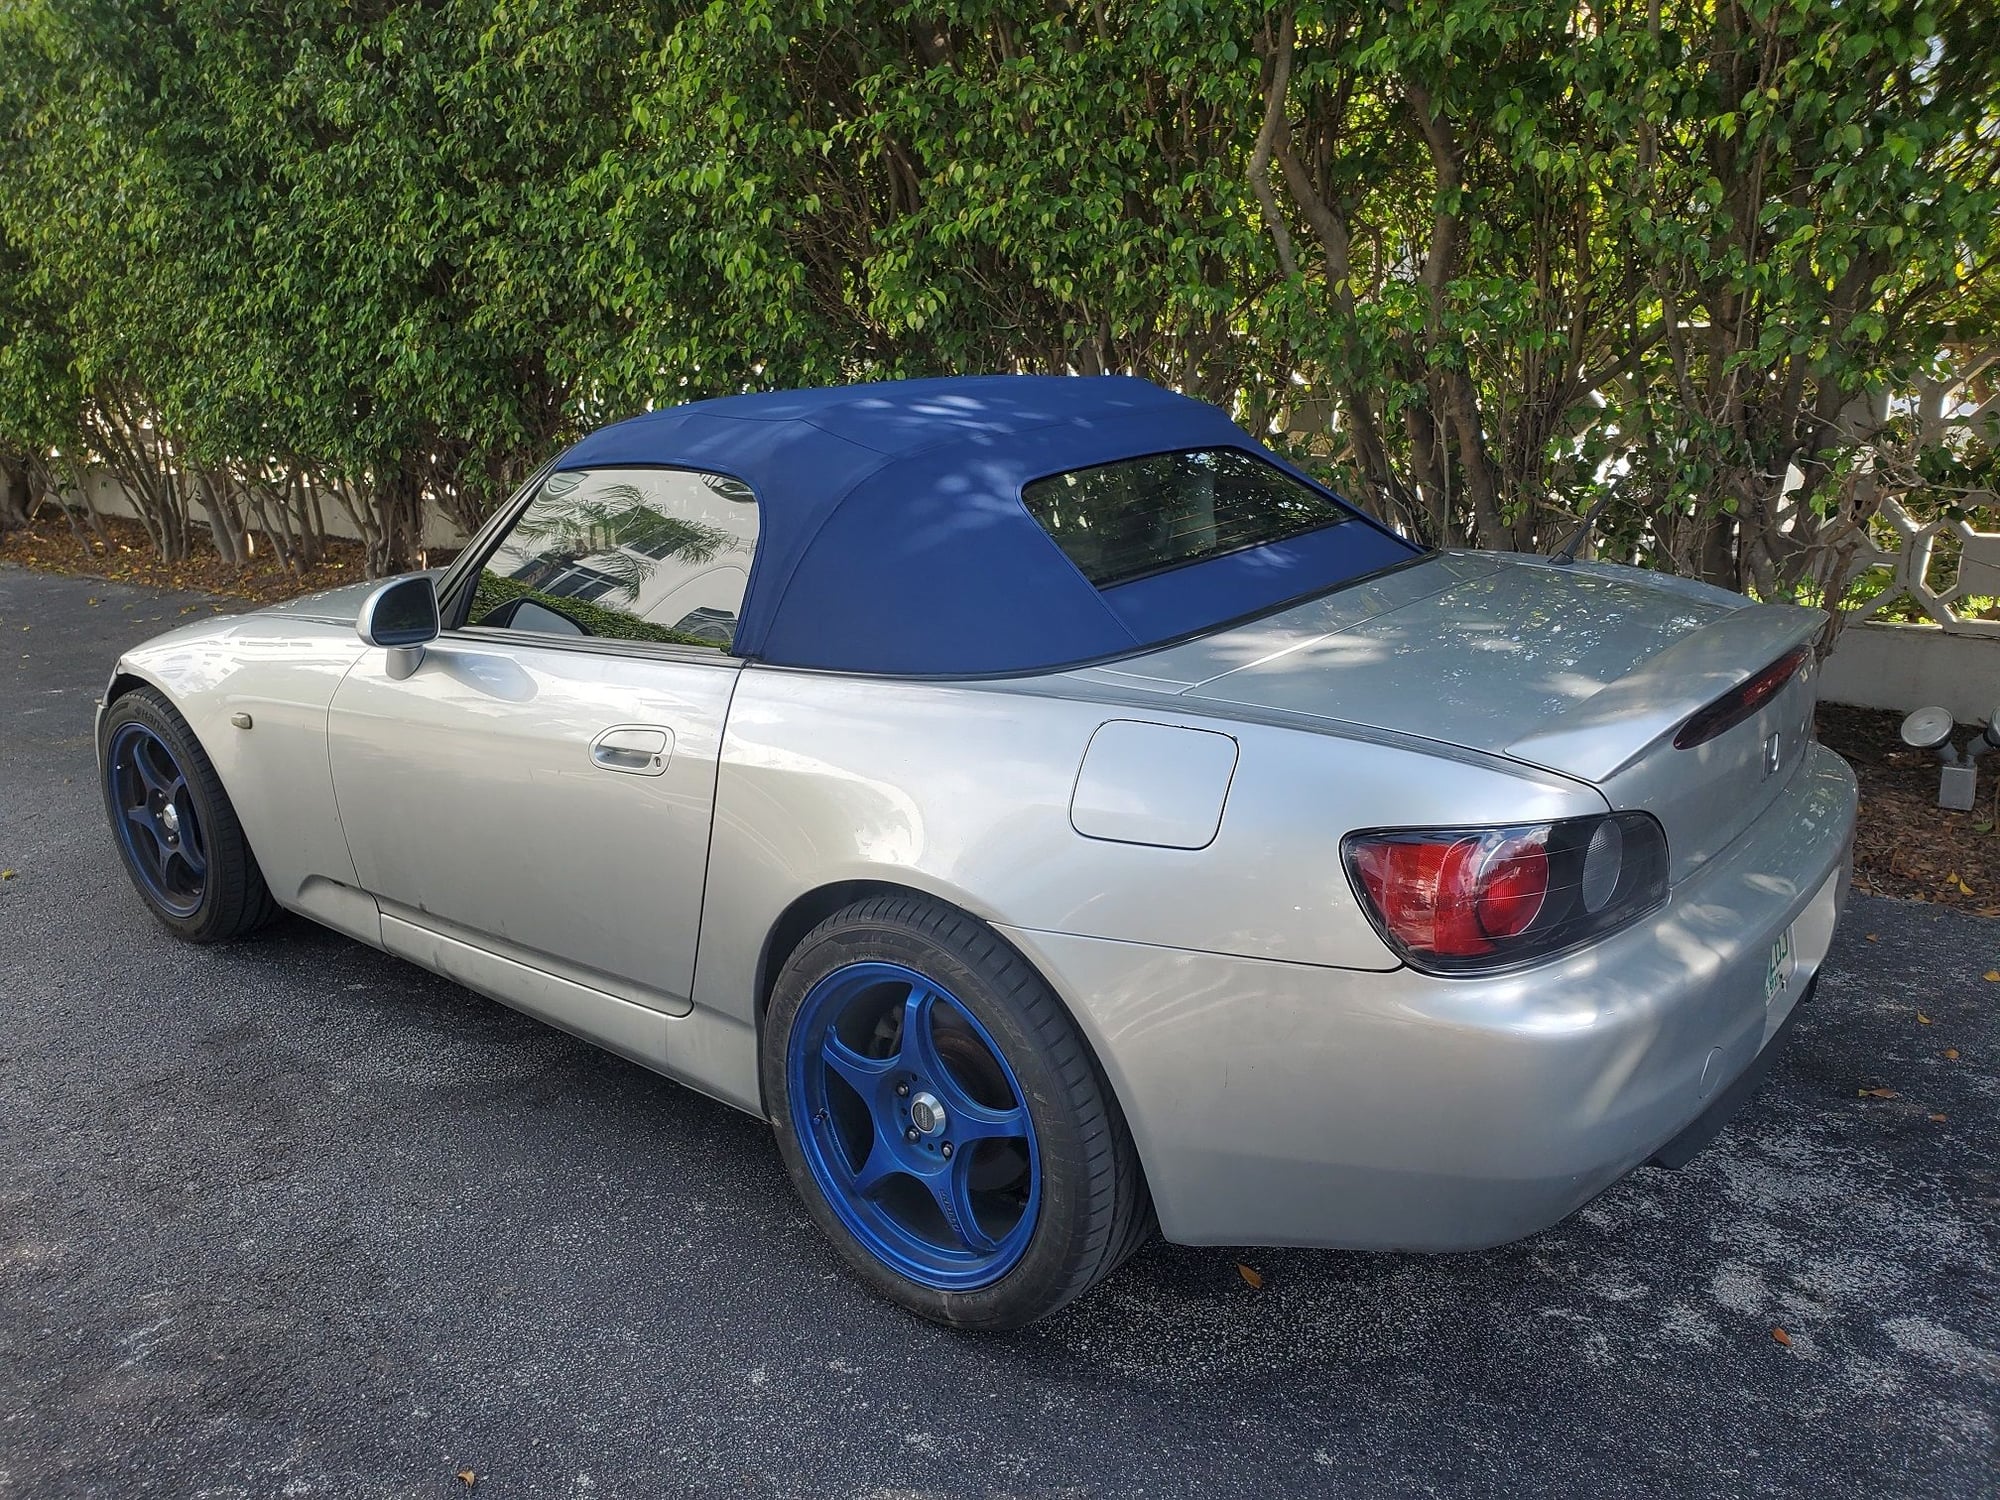 Honda S2000 (AP1) soft top, produced in Haartz Stayfast Canvas and